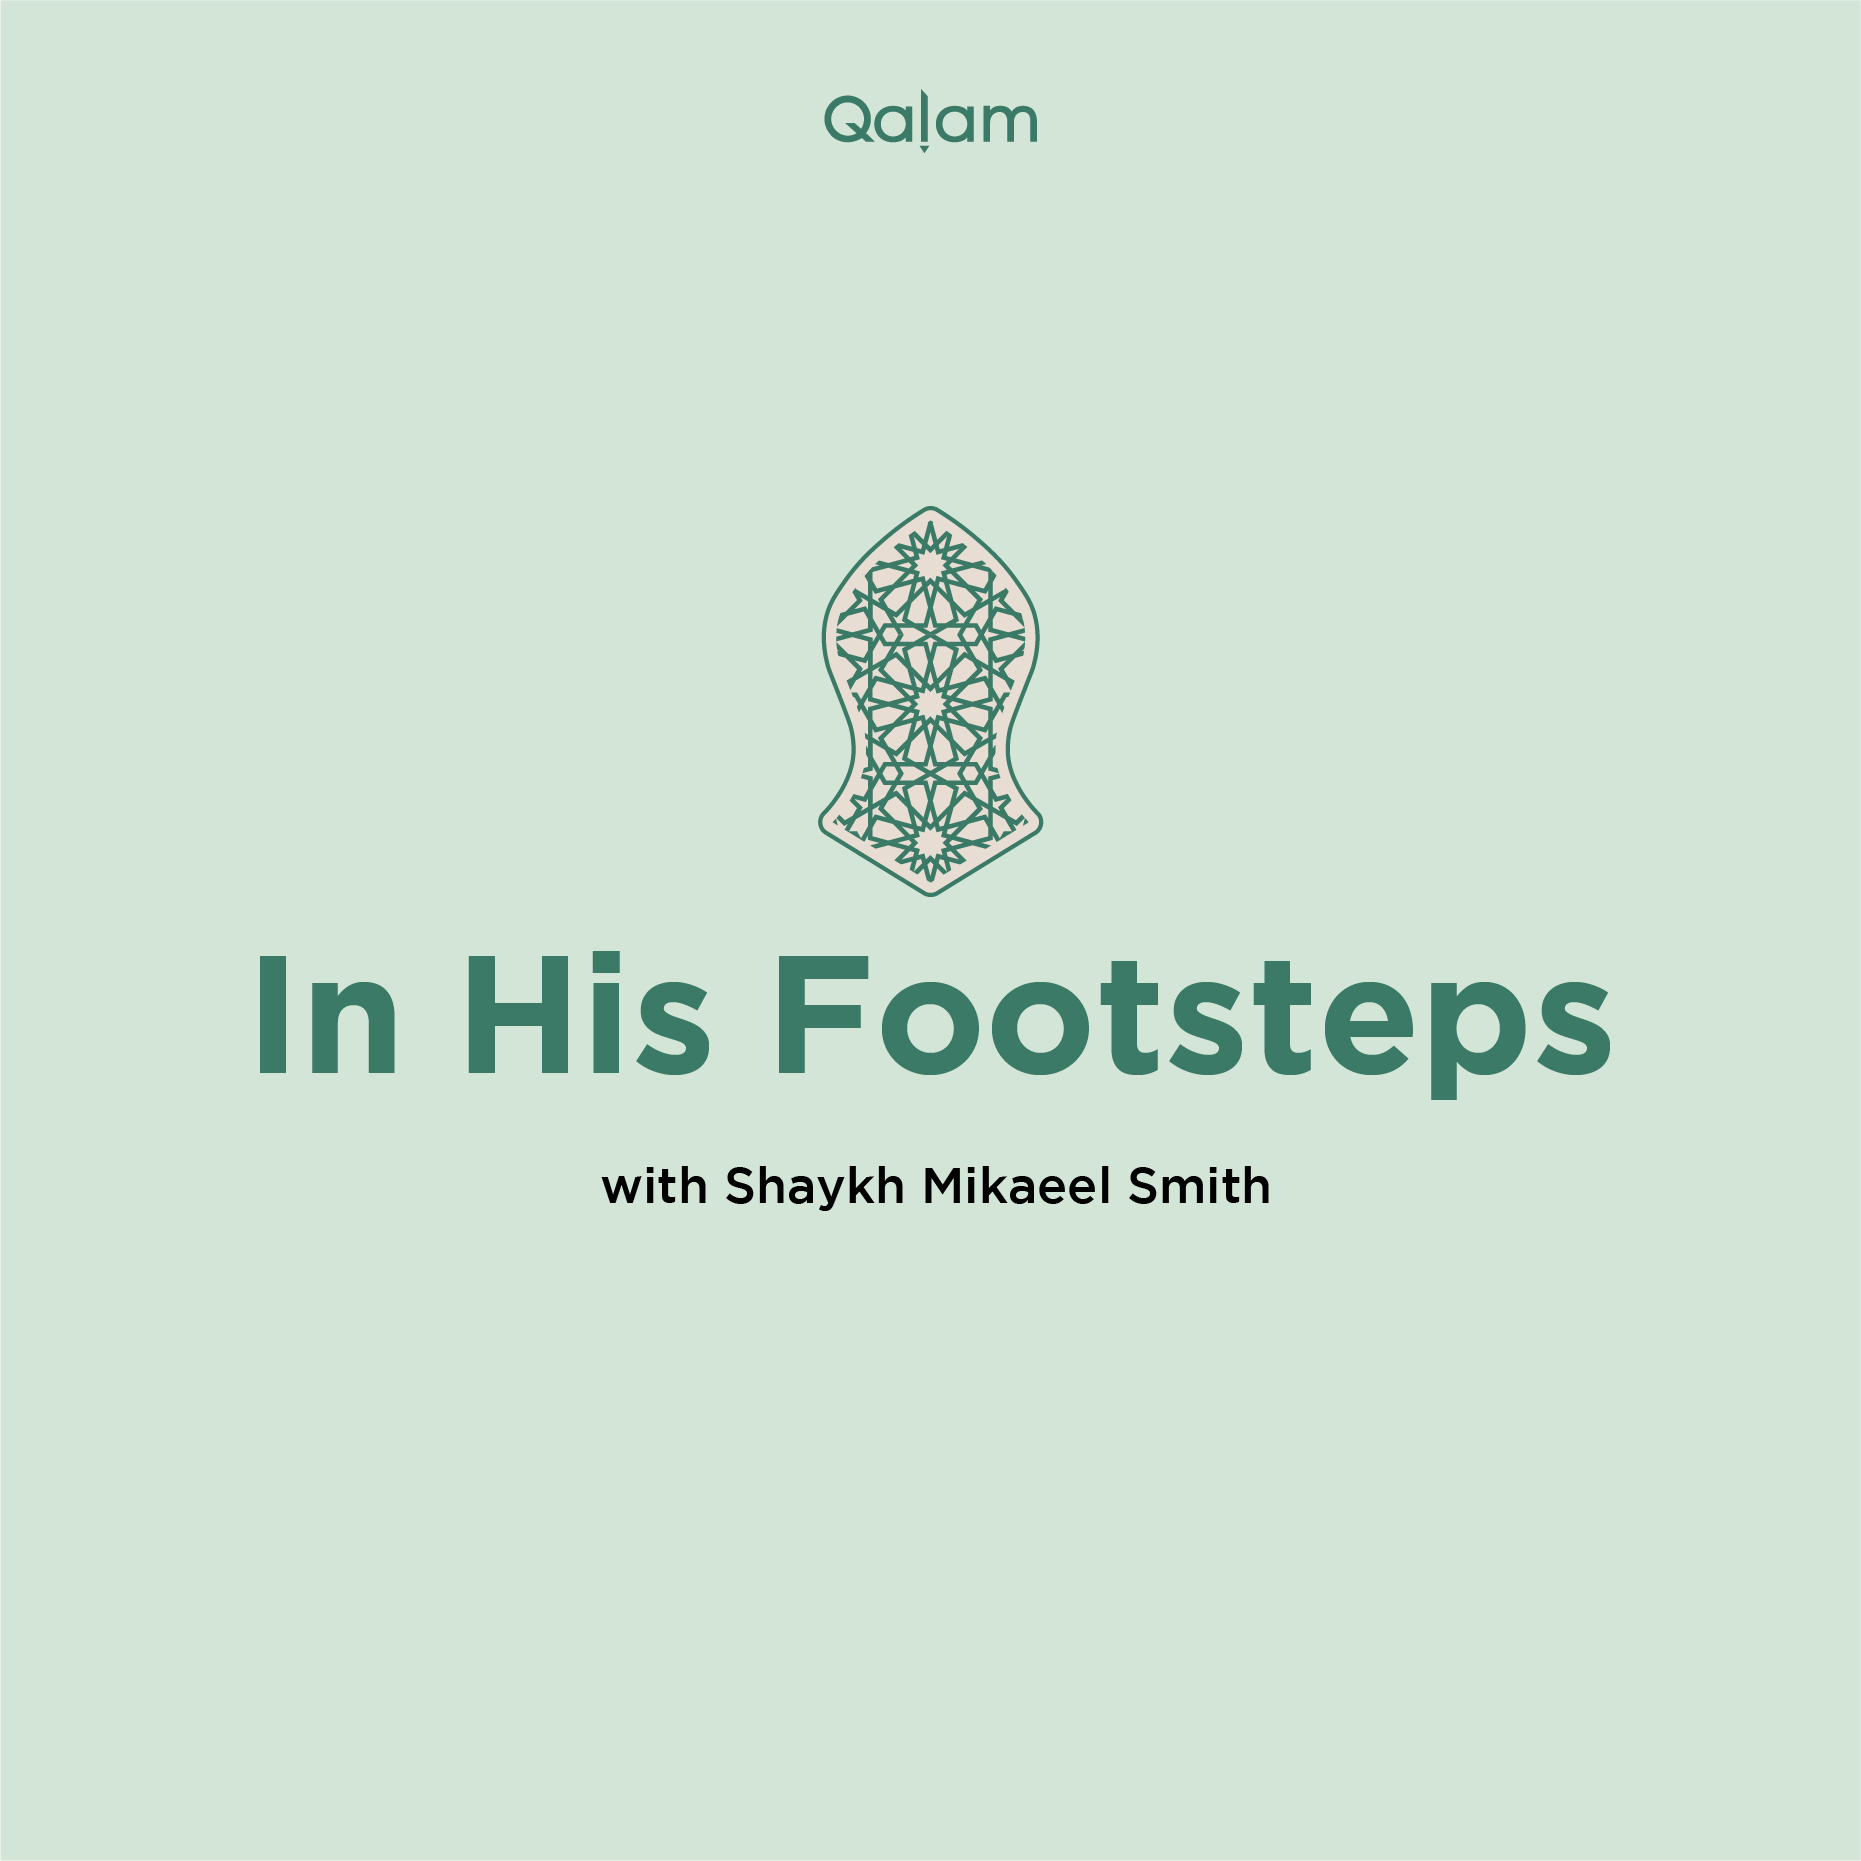 In His Footsteps: EP4